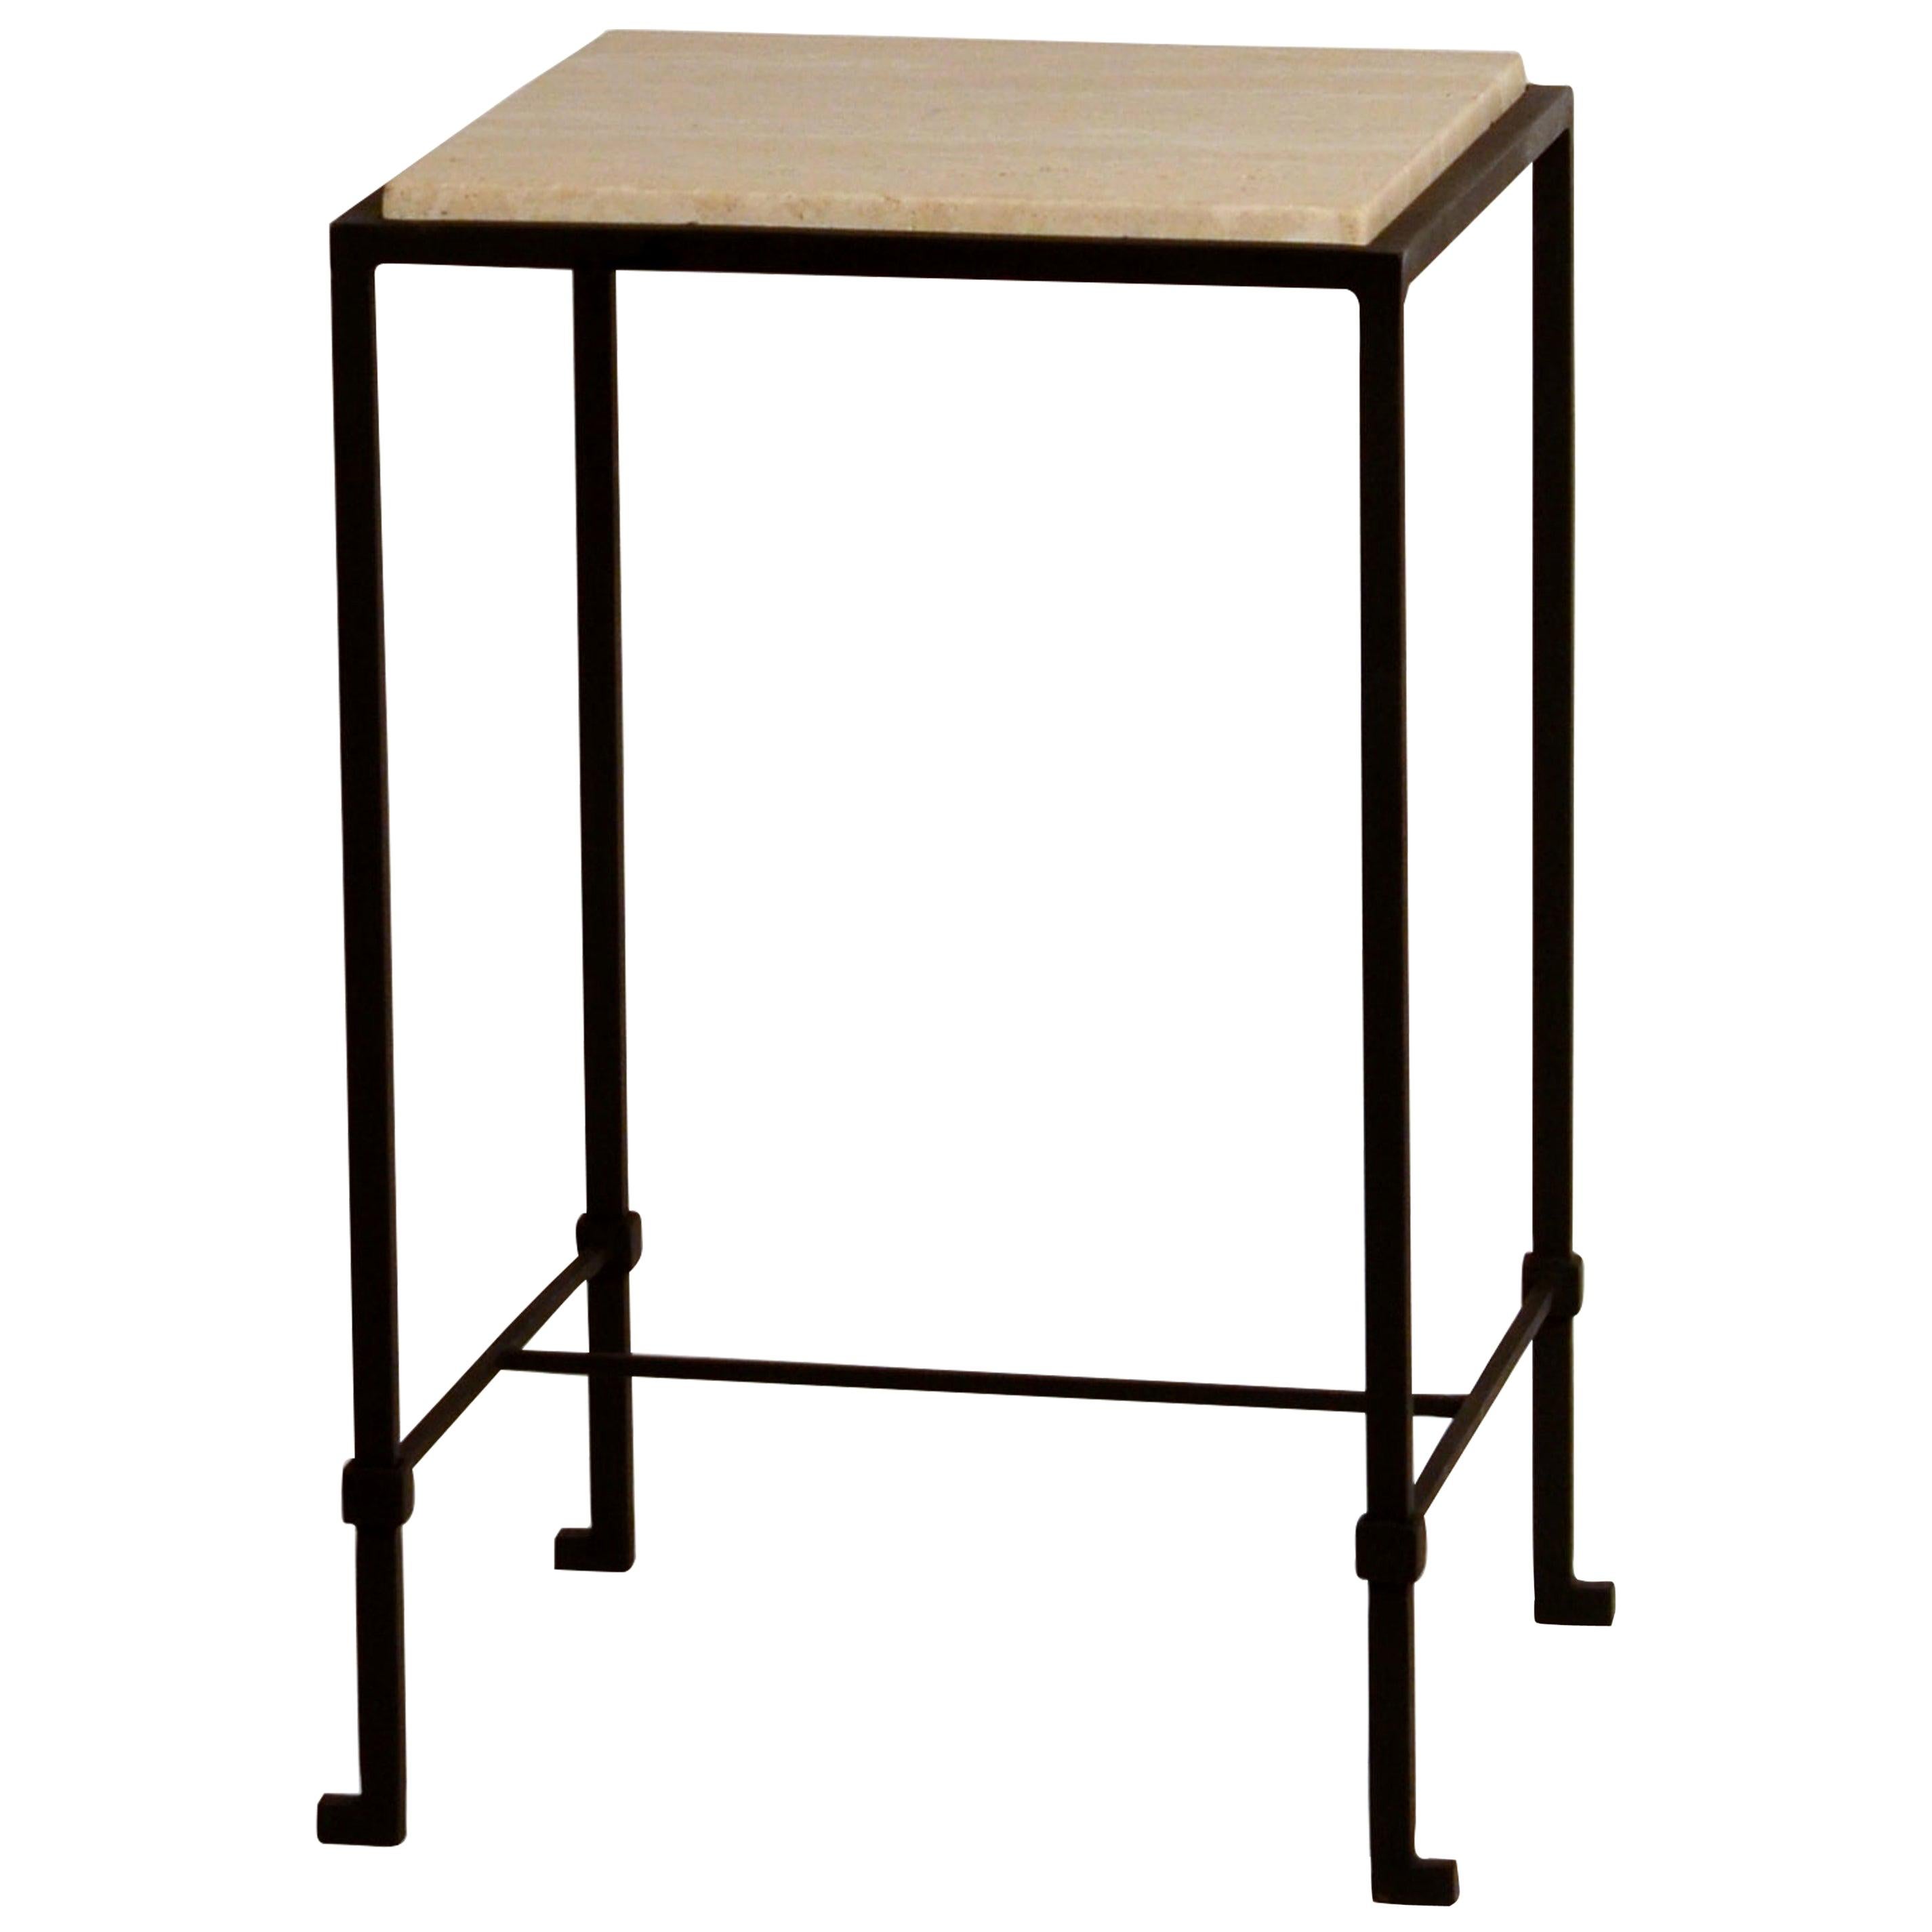 'Diagramme' Wrought Iron and Honed Travertine Drinks Table by Design Frères